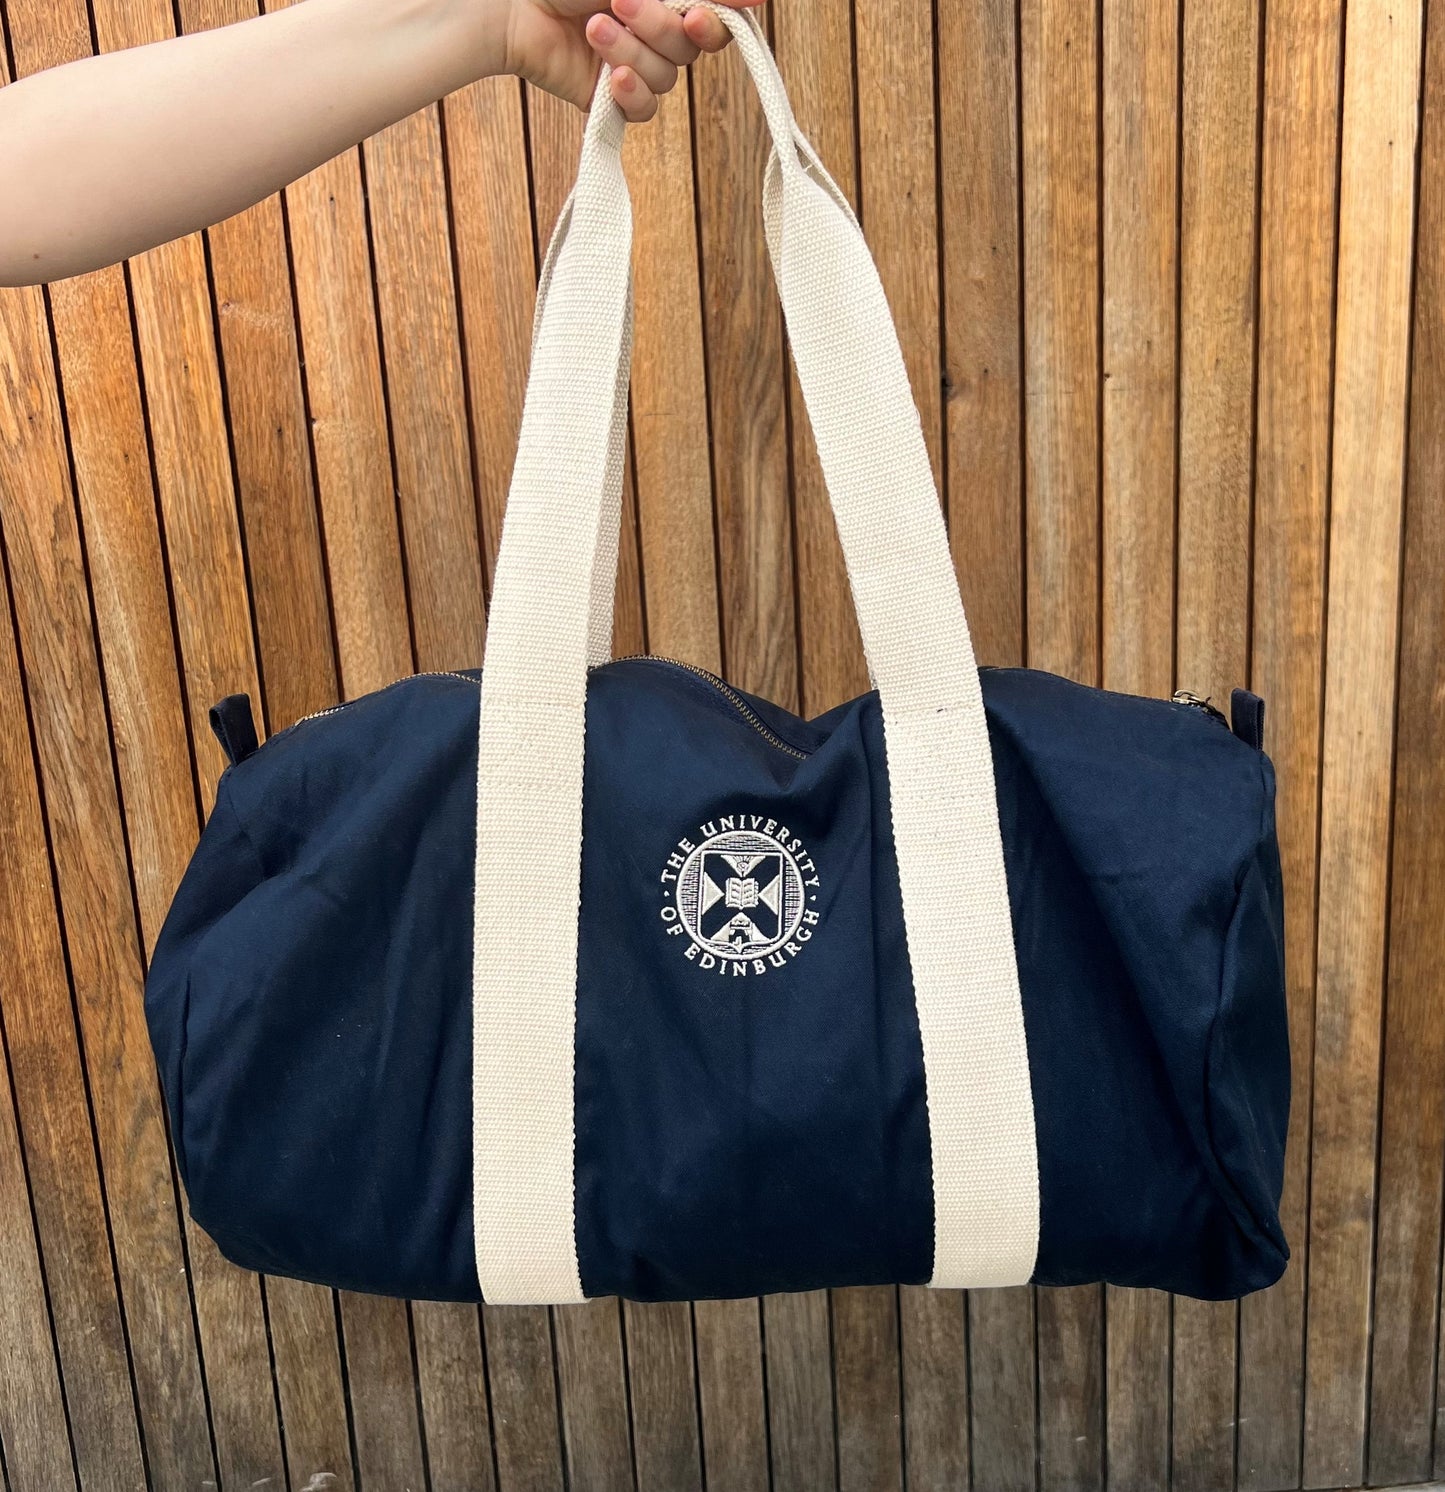 Navy barrel shaped canvas bage with cream handles. University crest is embriodered in the centre. Held up against a wooden fence.